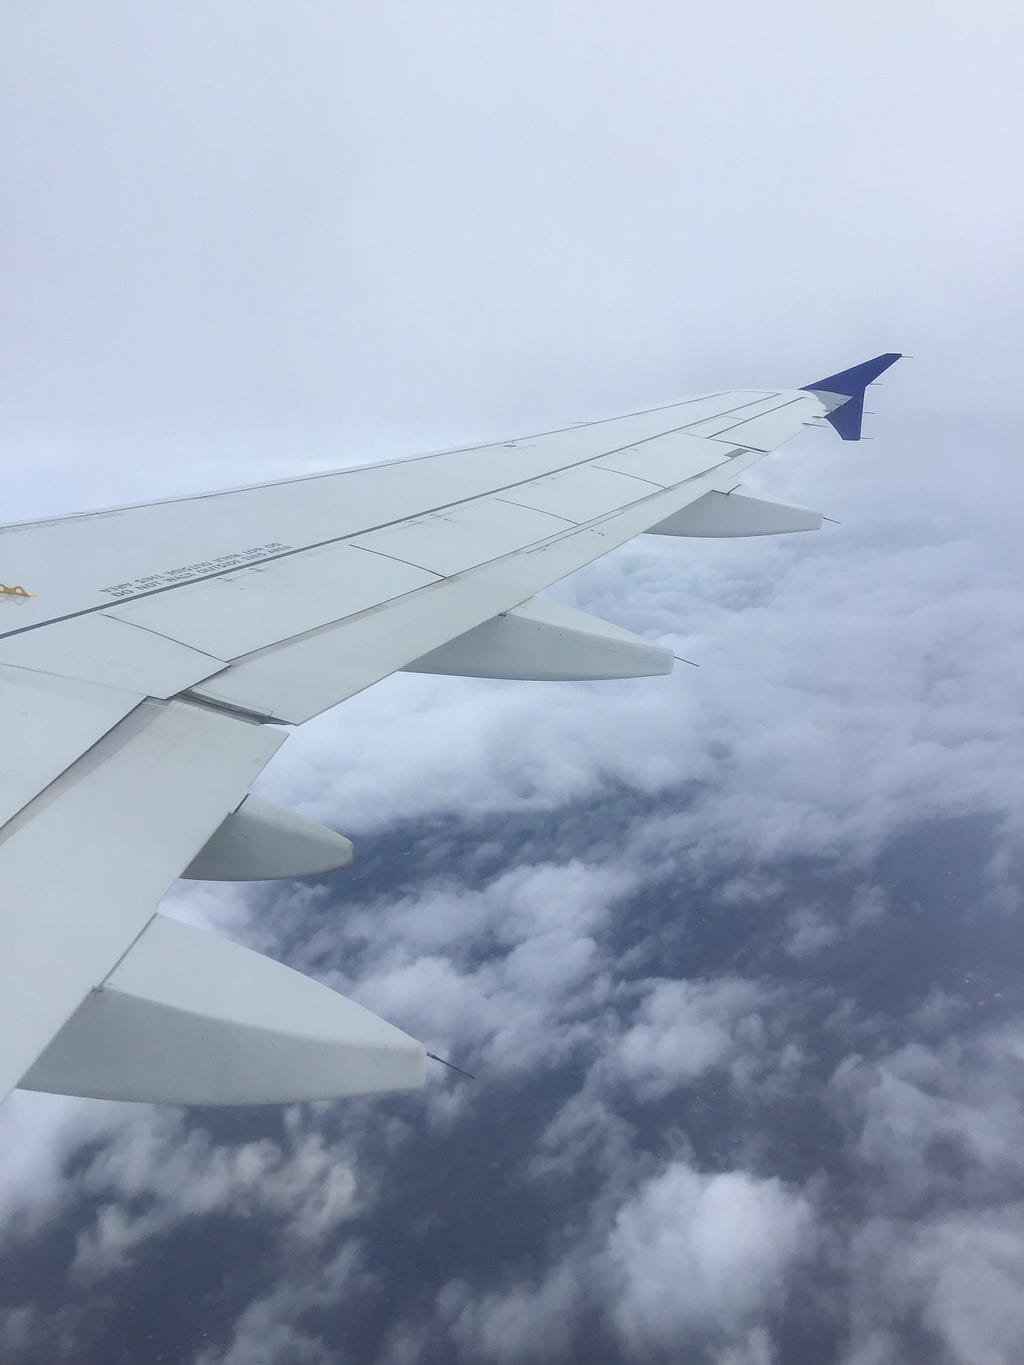 A gray plane wing against some white clouds with blue ocean far below